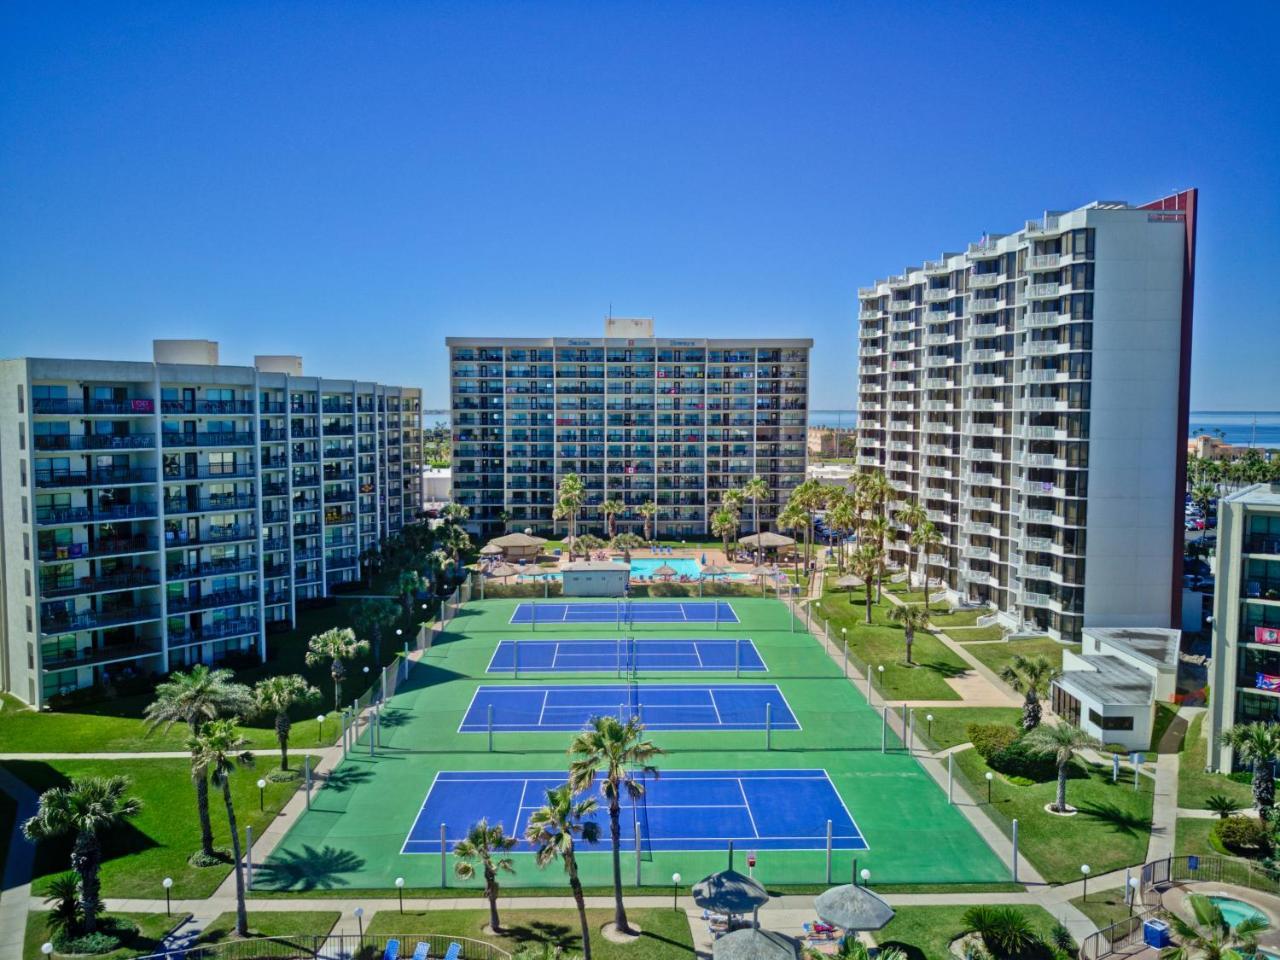 HOTEL SAIDA SOUTH PADRE ISLAND, TX 3* (United States) - from US$ 239 |  BOOKED